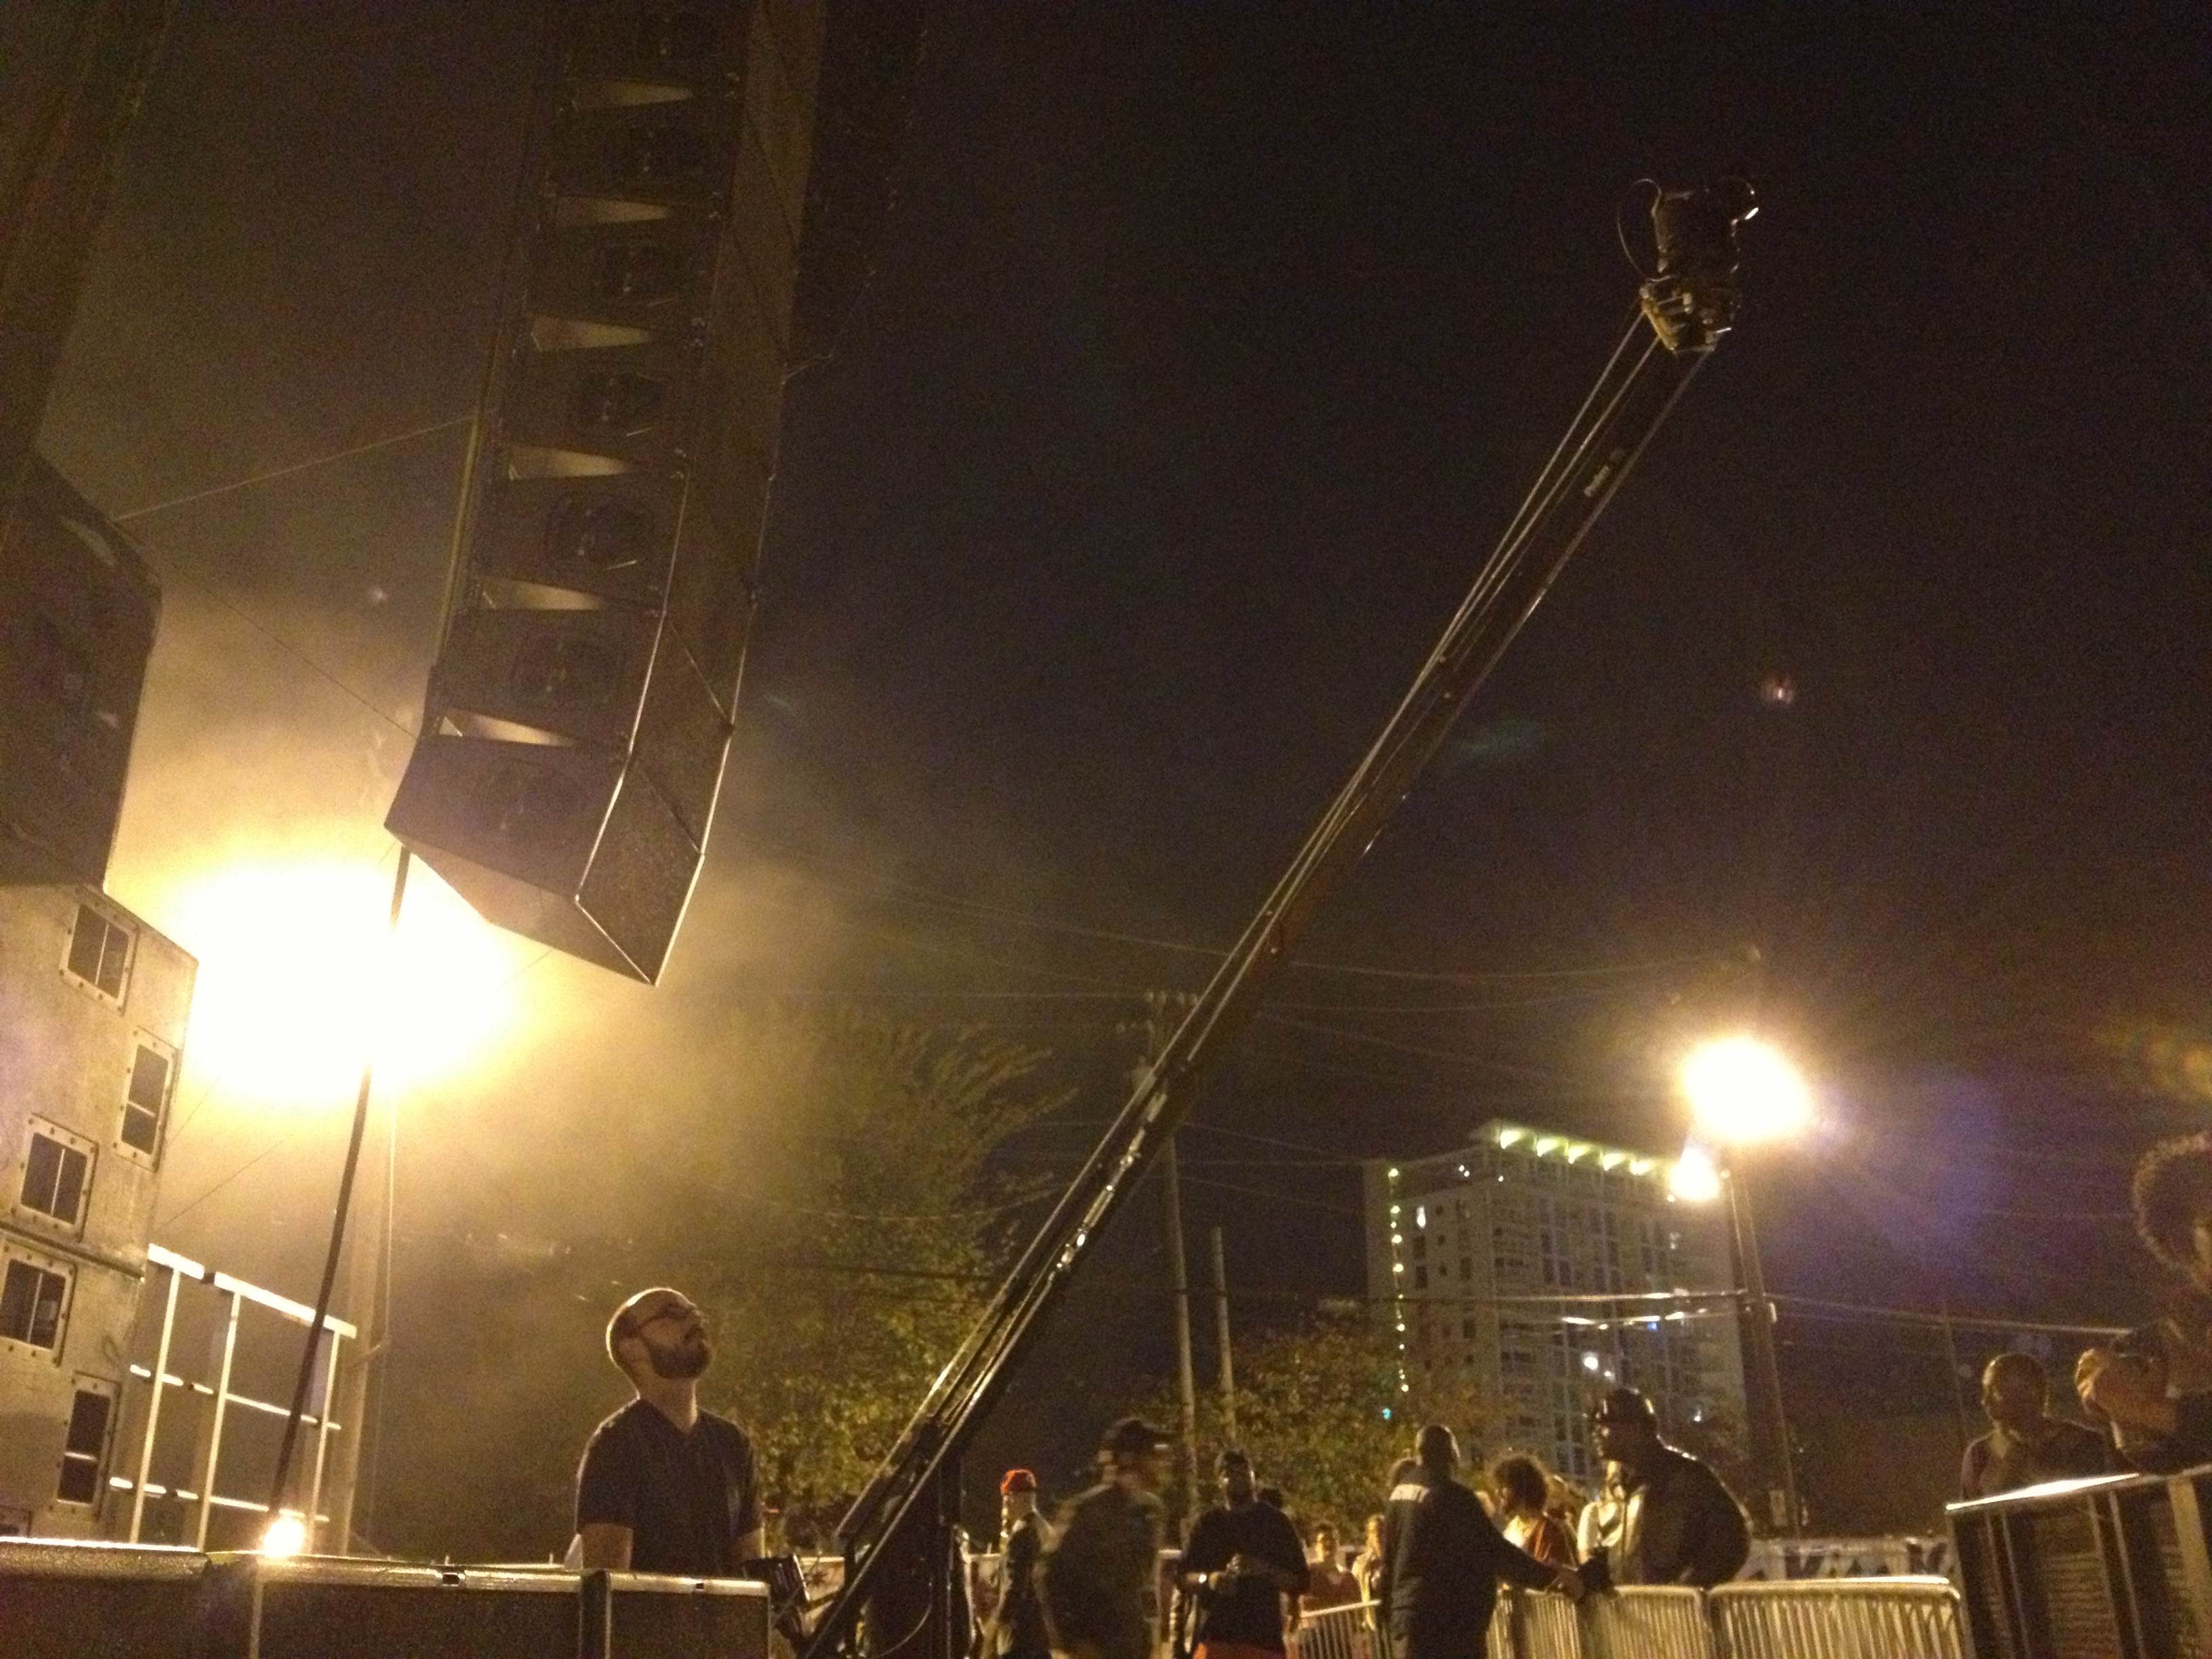 Throwback BTS. That’s a mighty big crane!